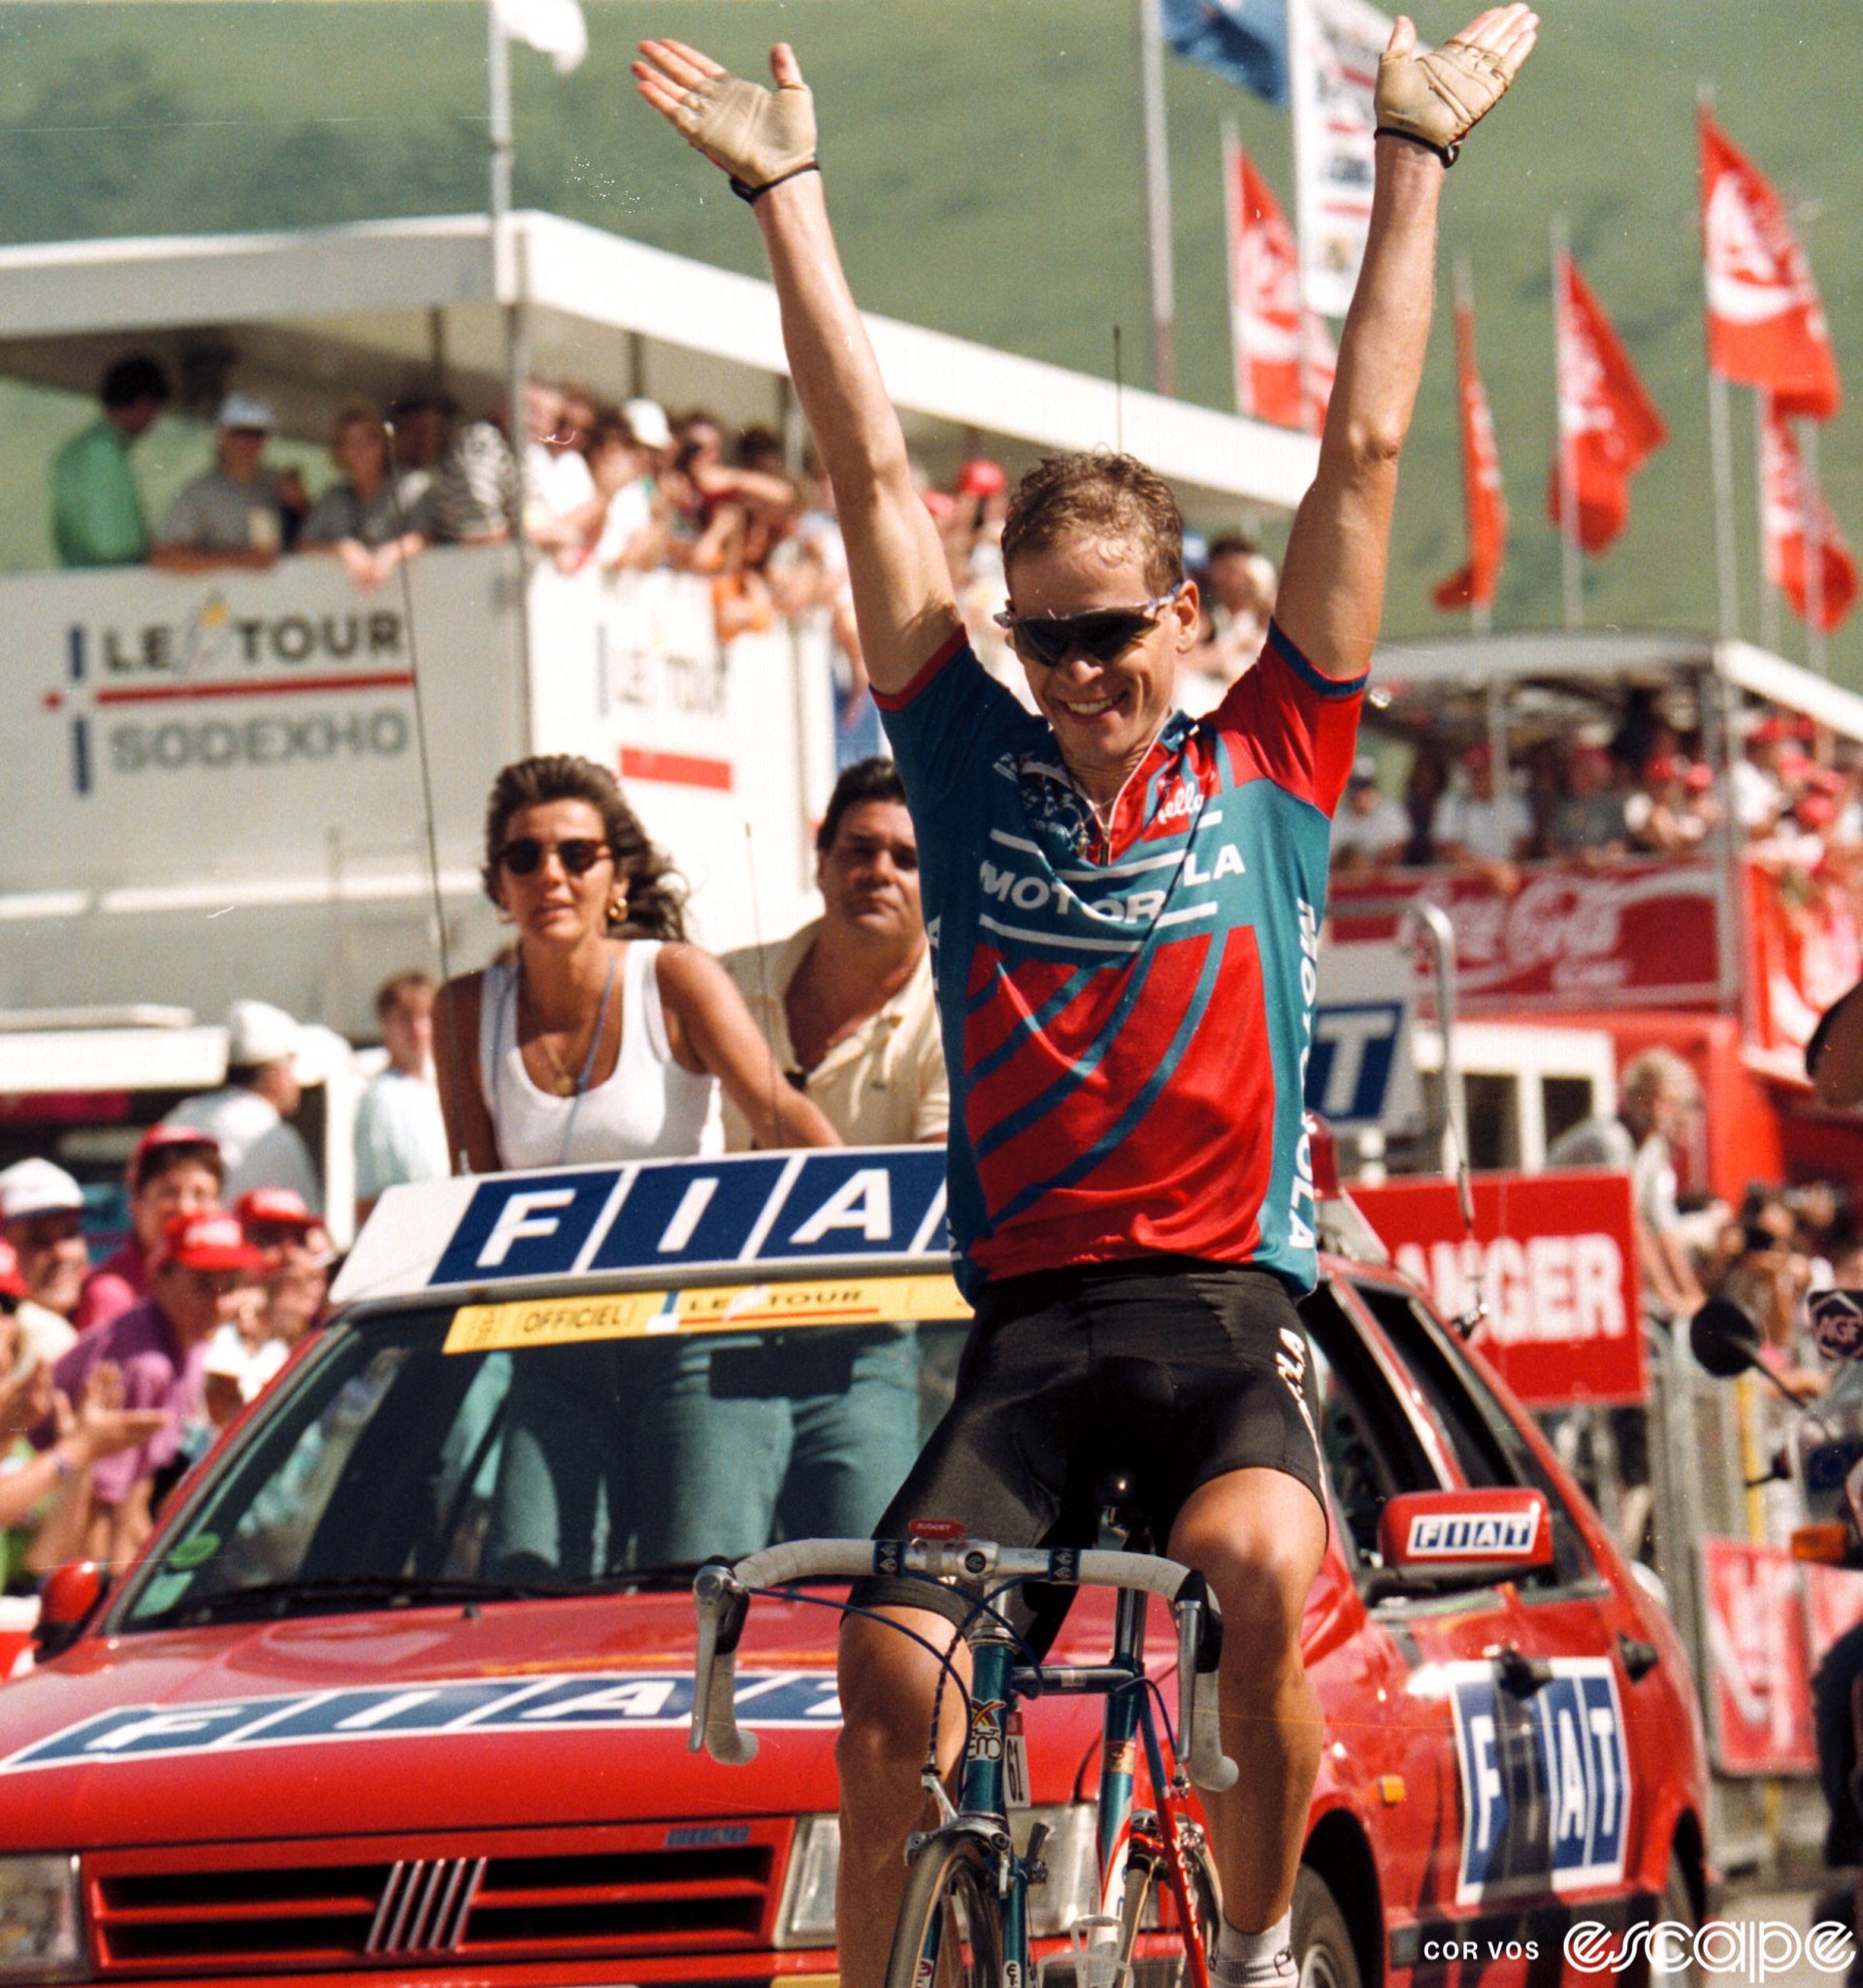 Hampsten throws his arms in the air as he crosses the finish line to win the Alpe d'Huez stage of the 1992 Tour de France. He's slightly balding now, the tousled head of curls thinning, and has a wide smile on his face.